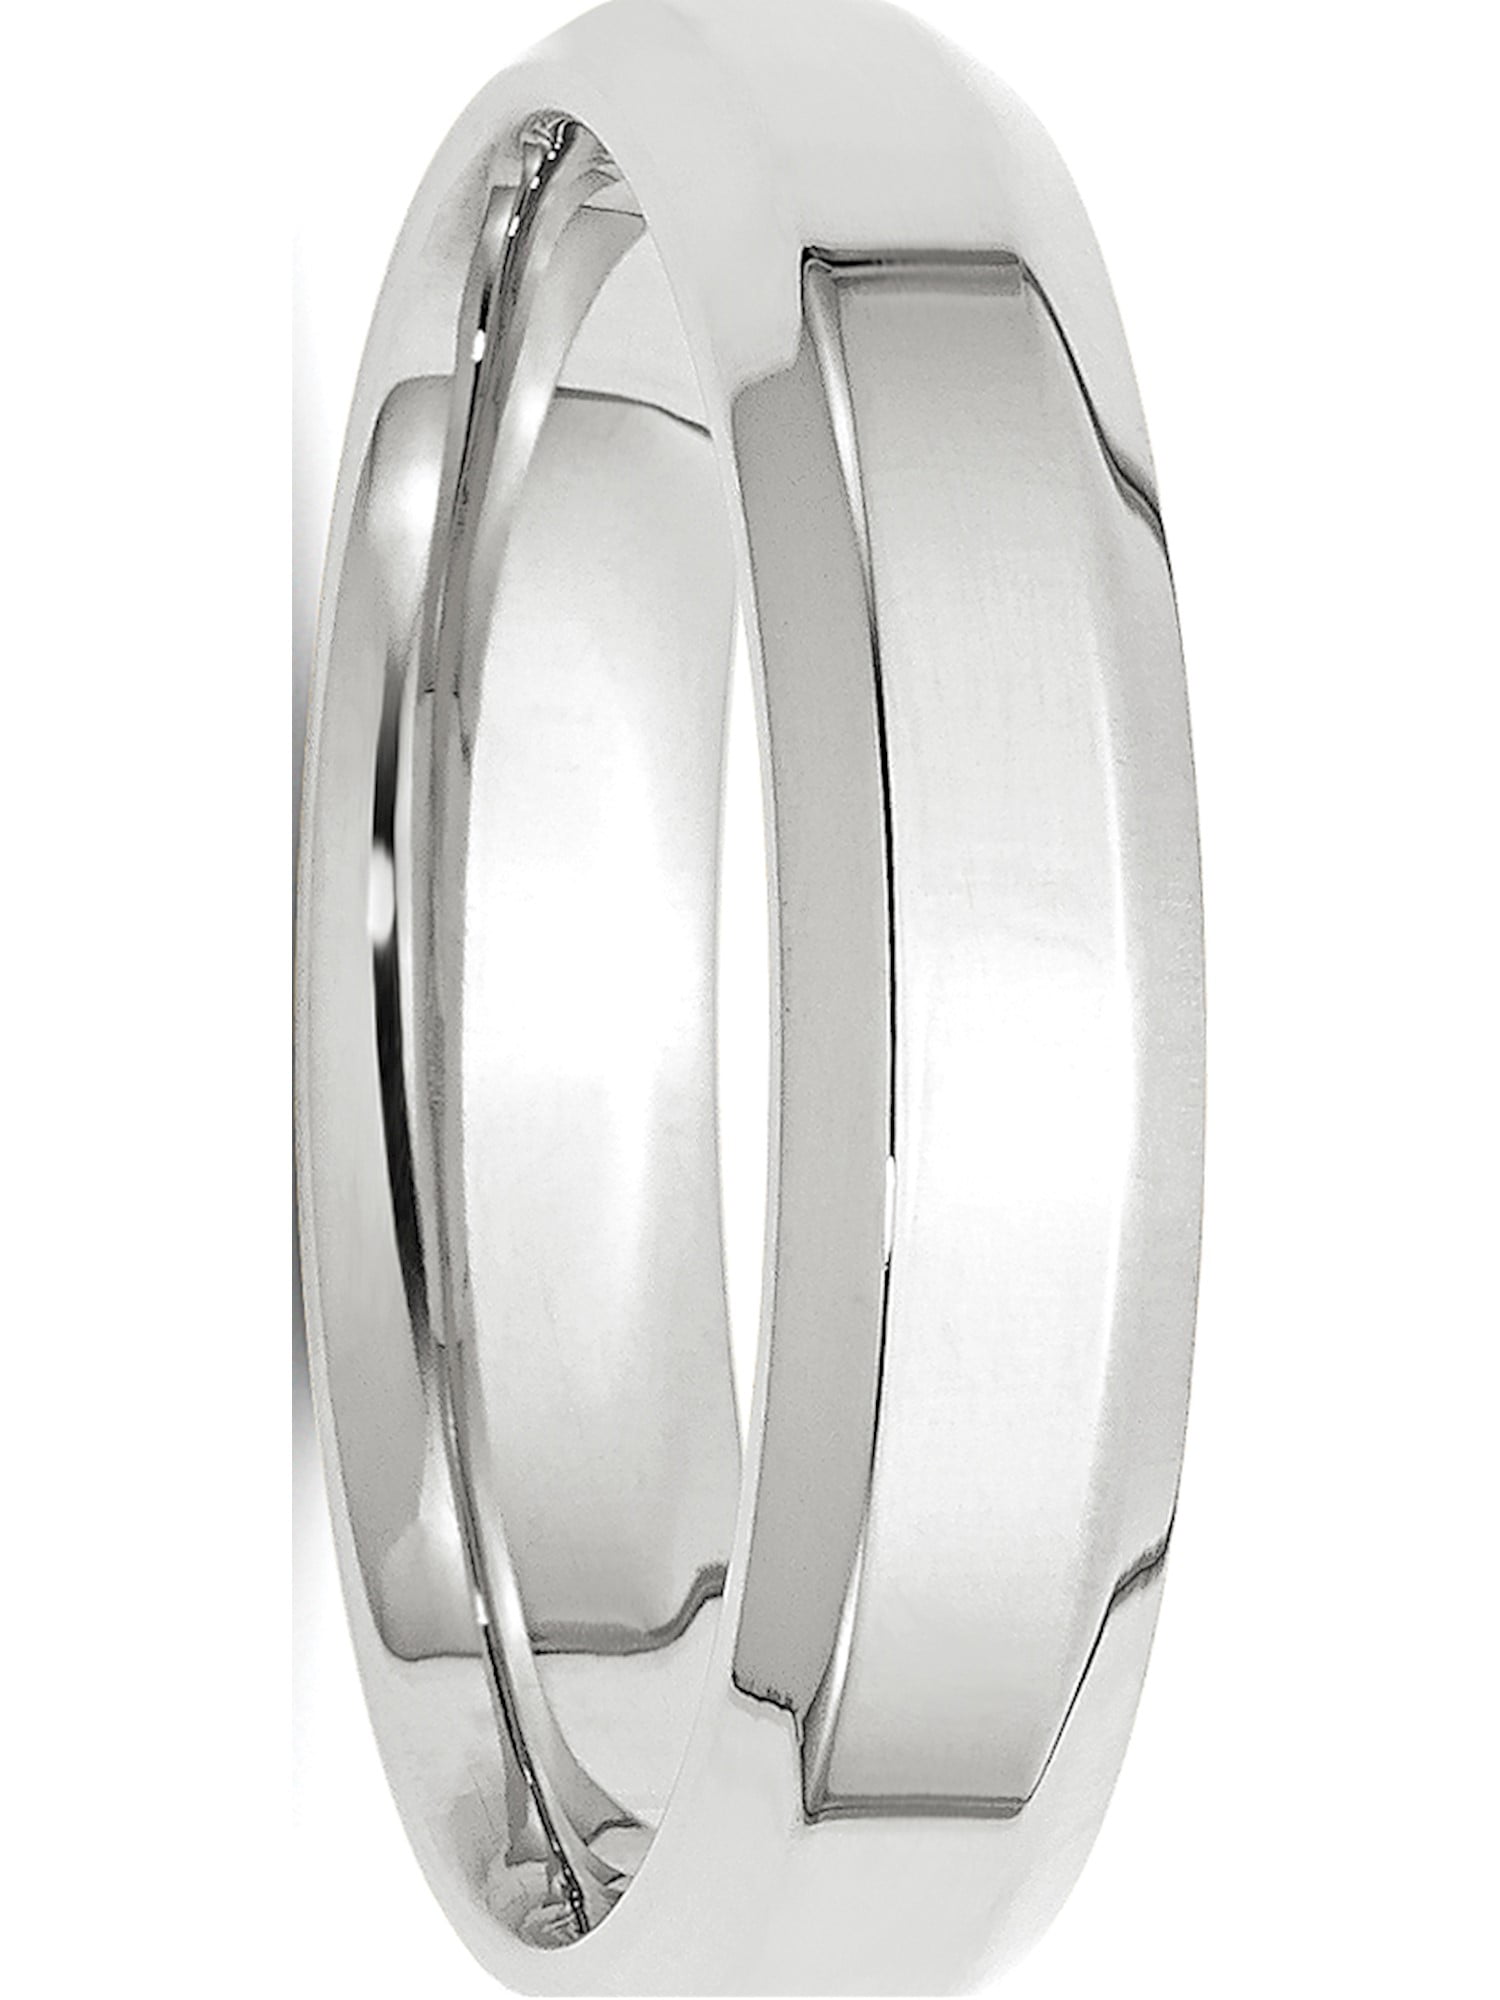 Solid 10k White Gold 5mm Bevel Edge Comfort Fit Wedding Band